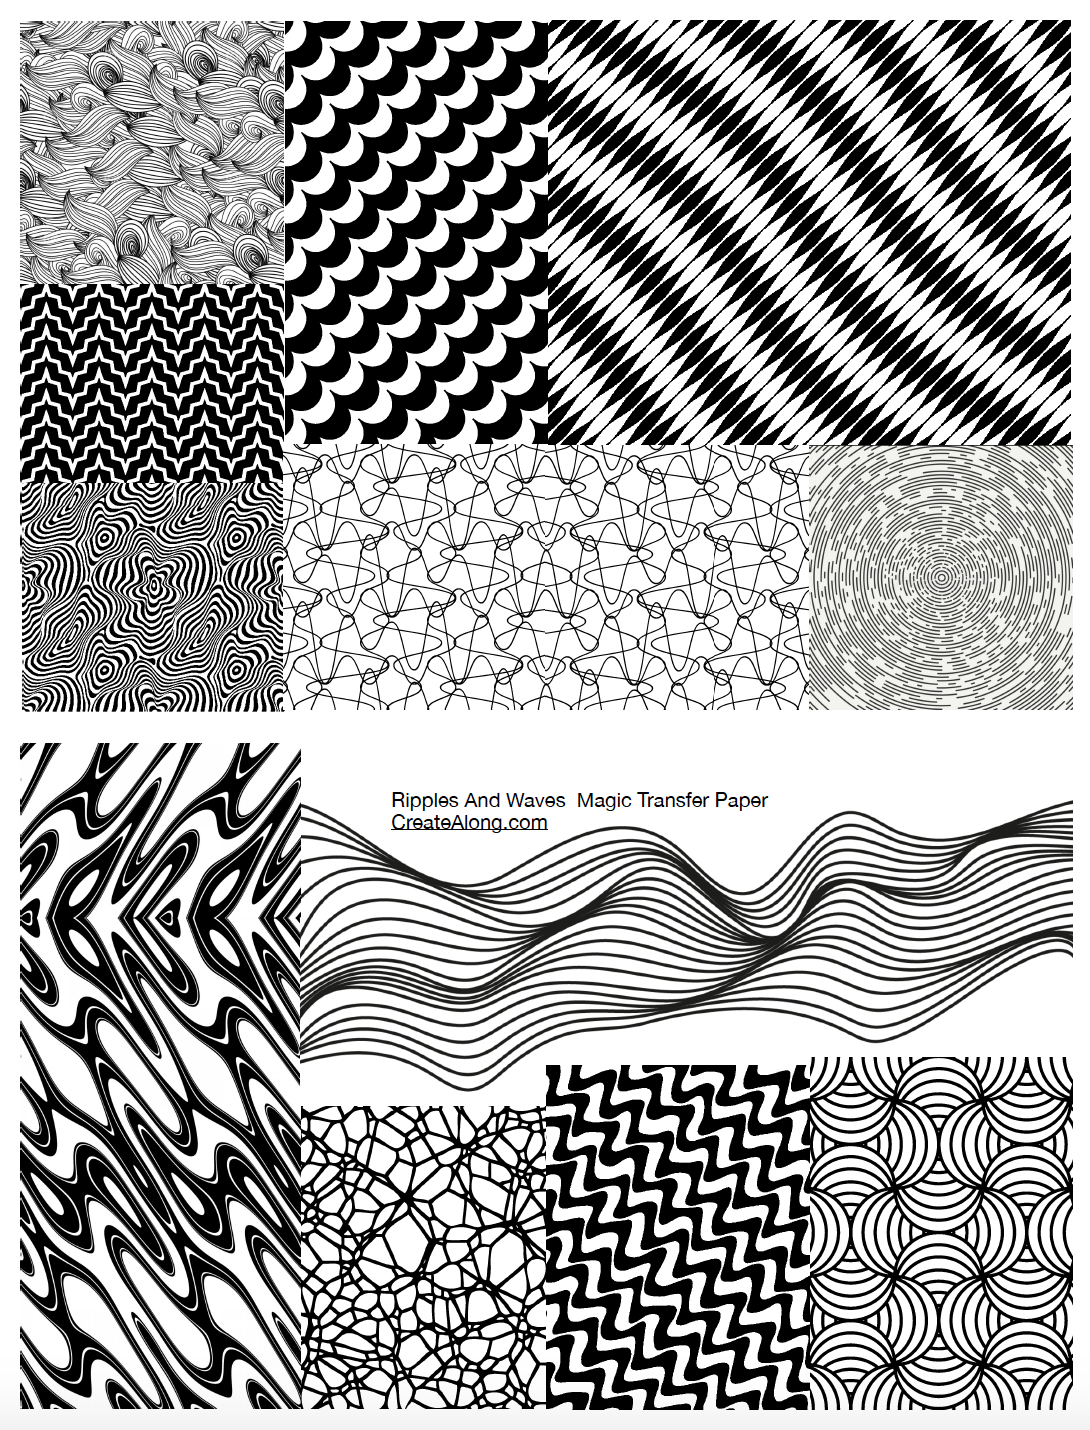 Digital Ripples & Waves Image Transfer PDF for creating images on raw polymer clay and for use with Magic Transfer Paper